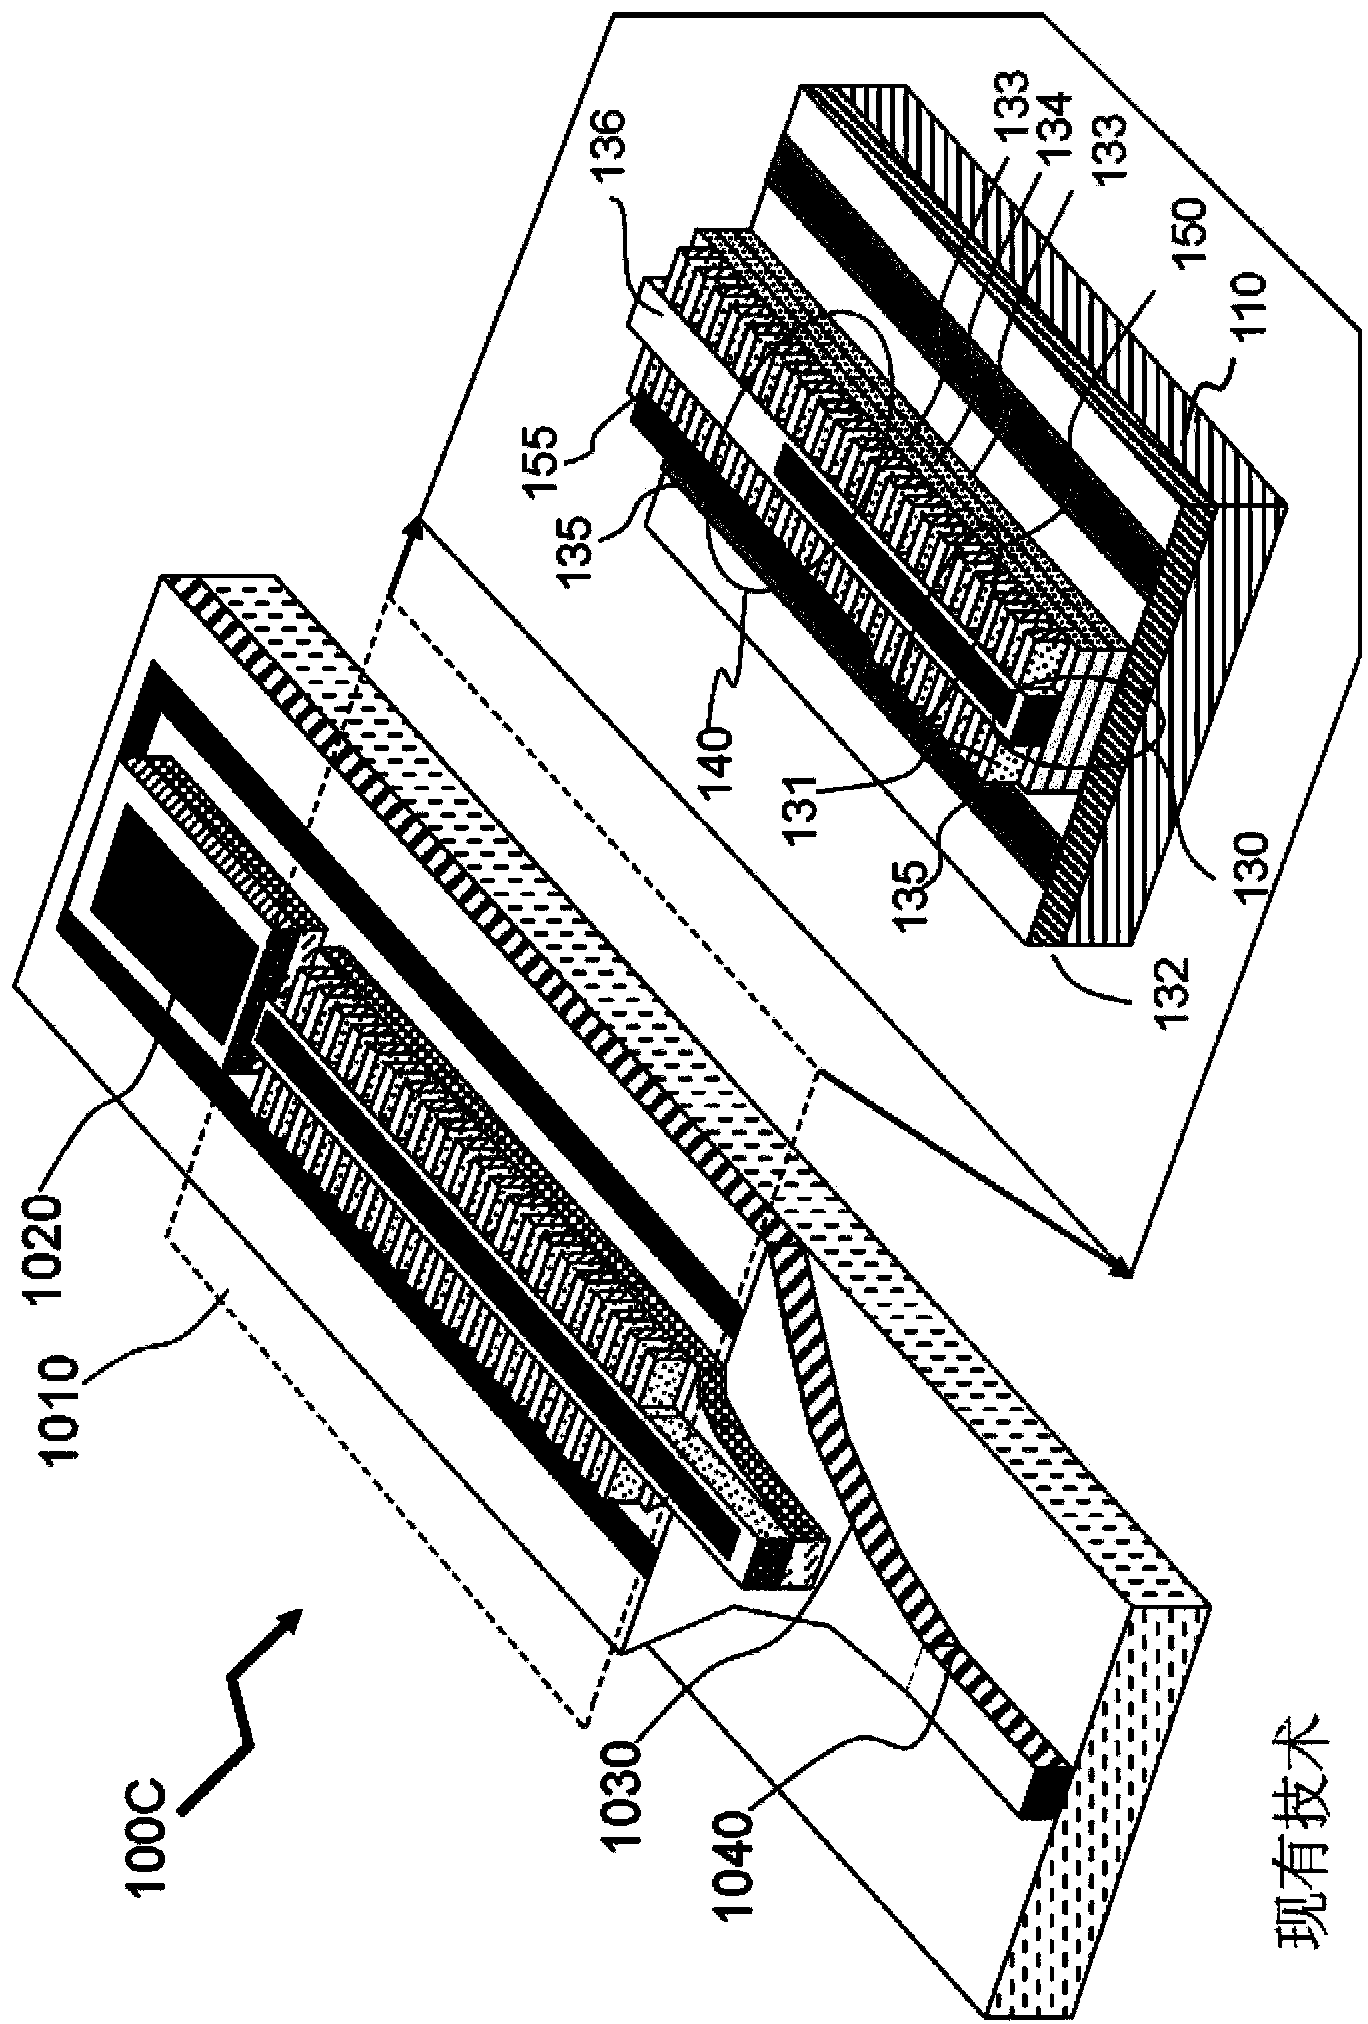 Vertically-coupled surface-etched grating DFB laser